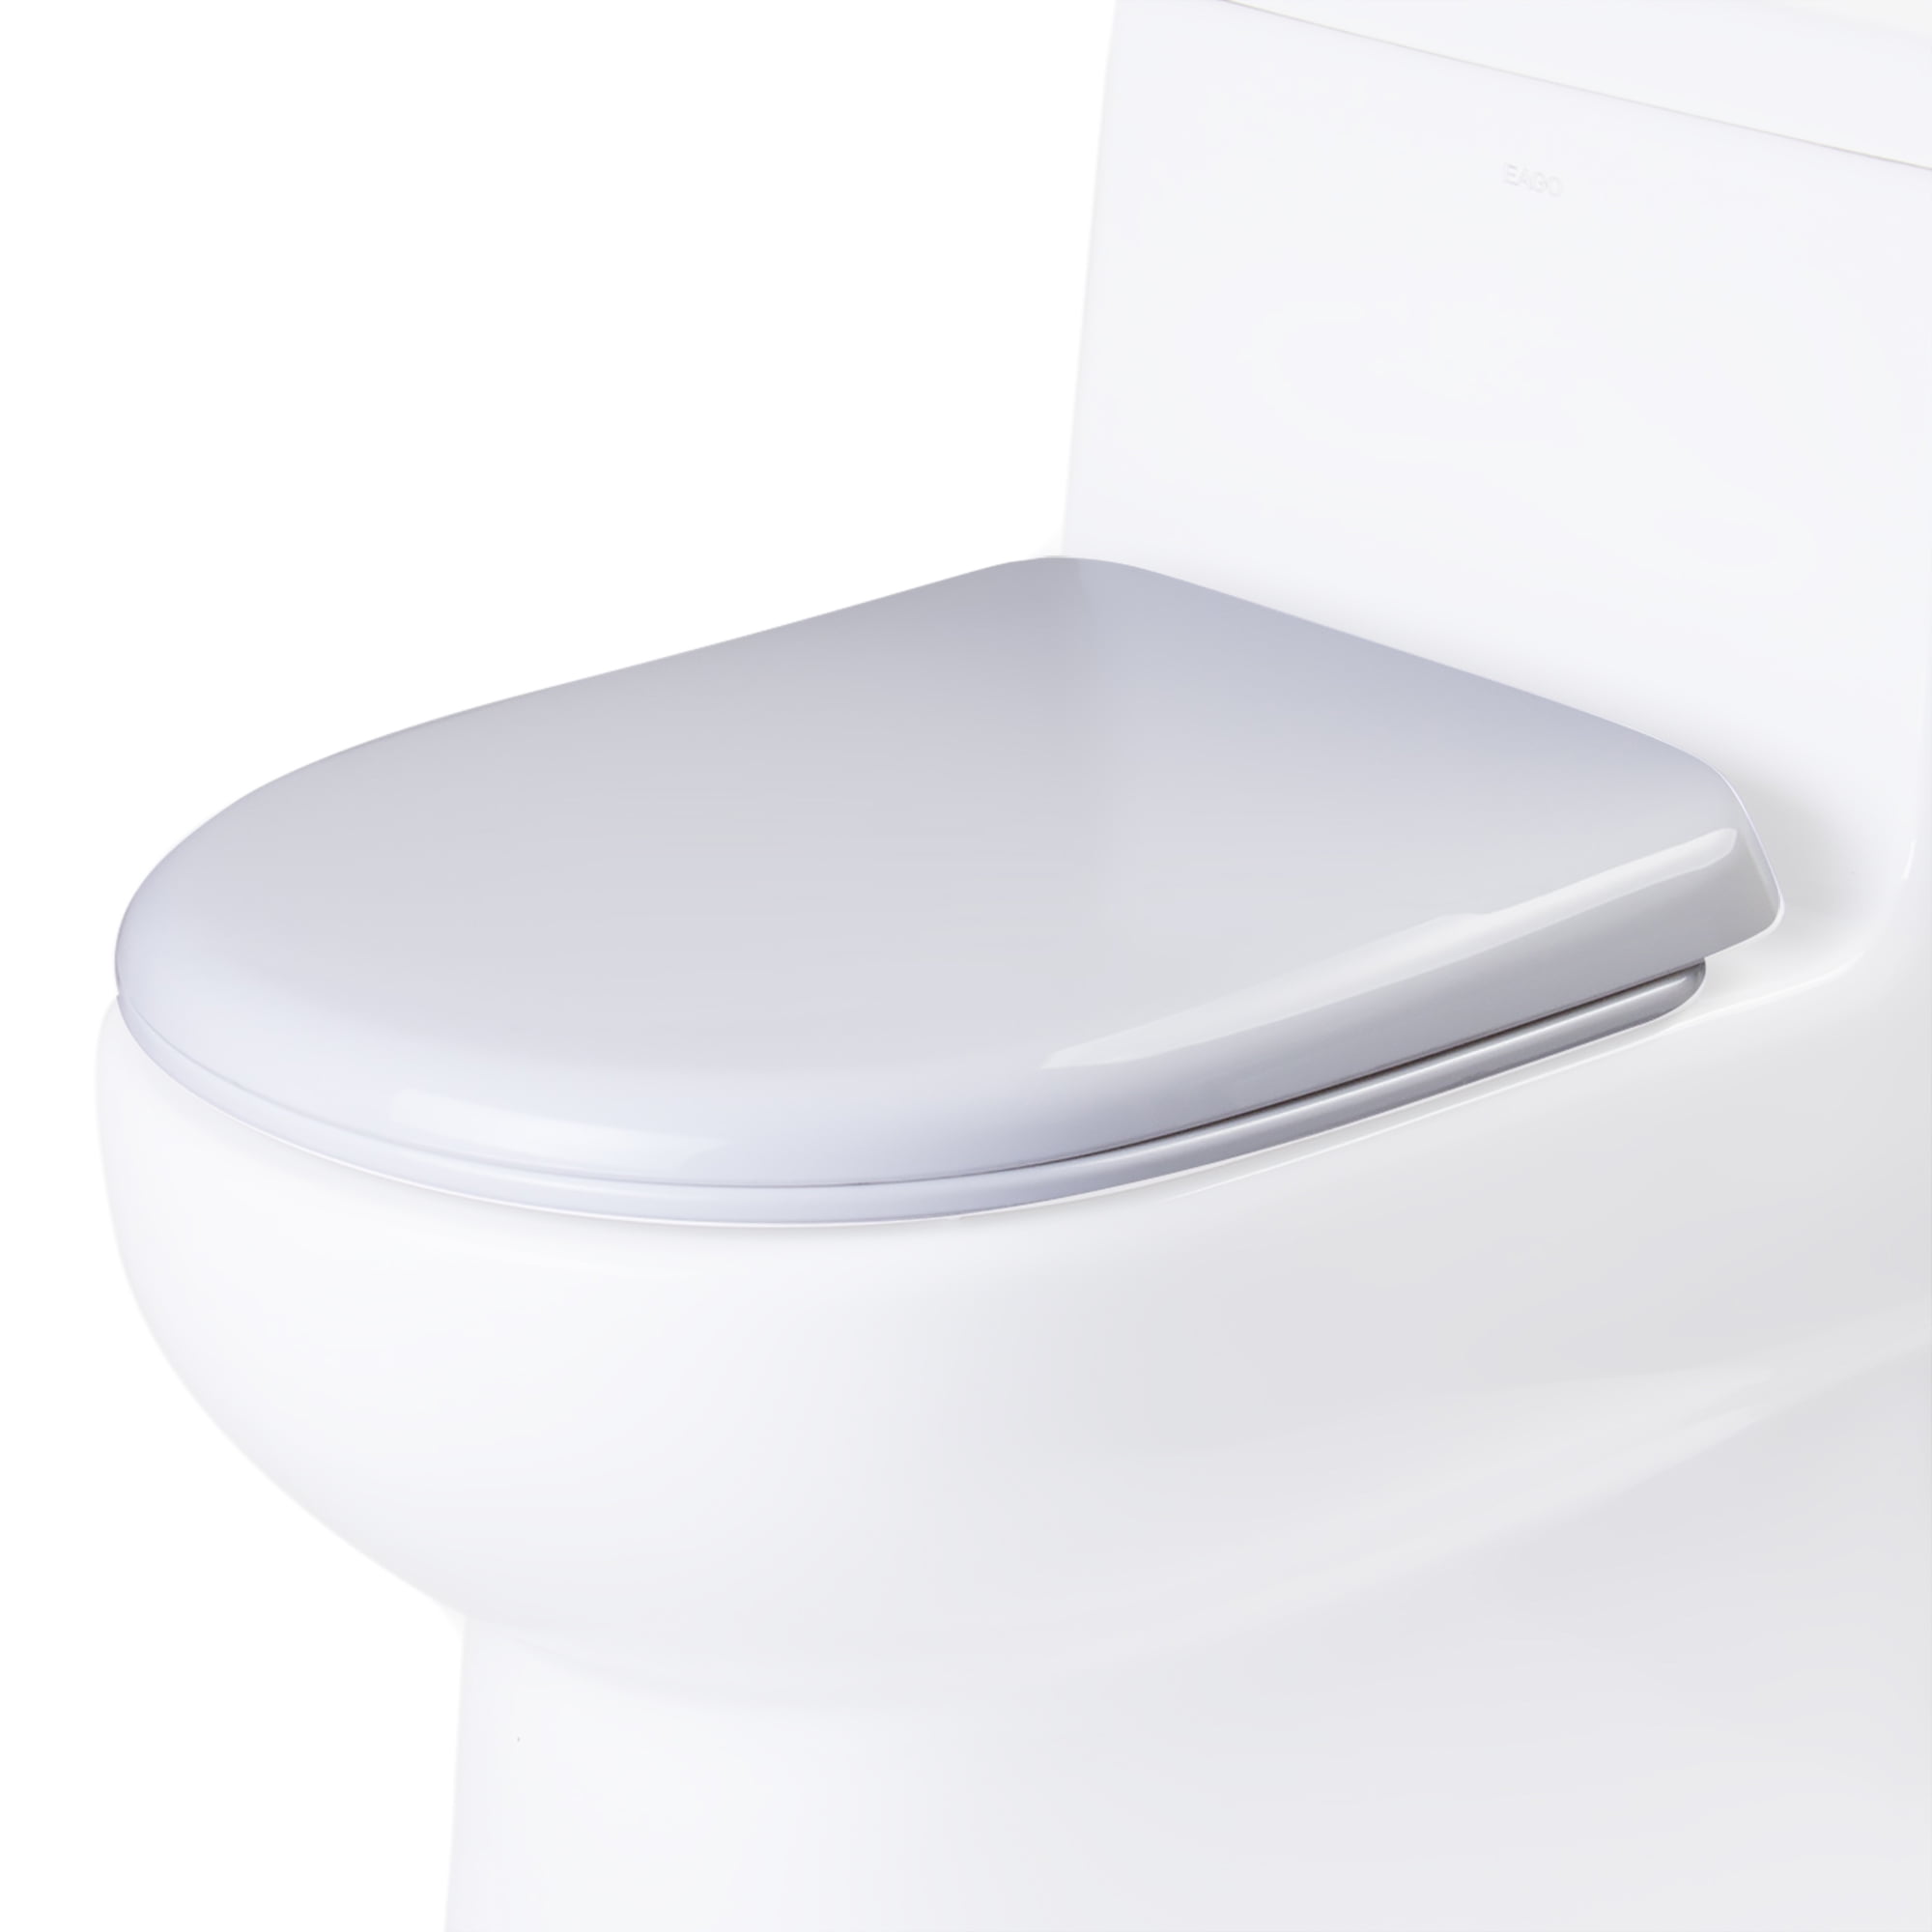 R-351seat Replacement Soft Closing Plastic Toilet Seat, White For Tb351